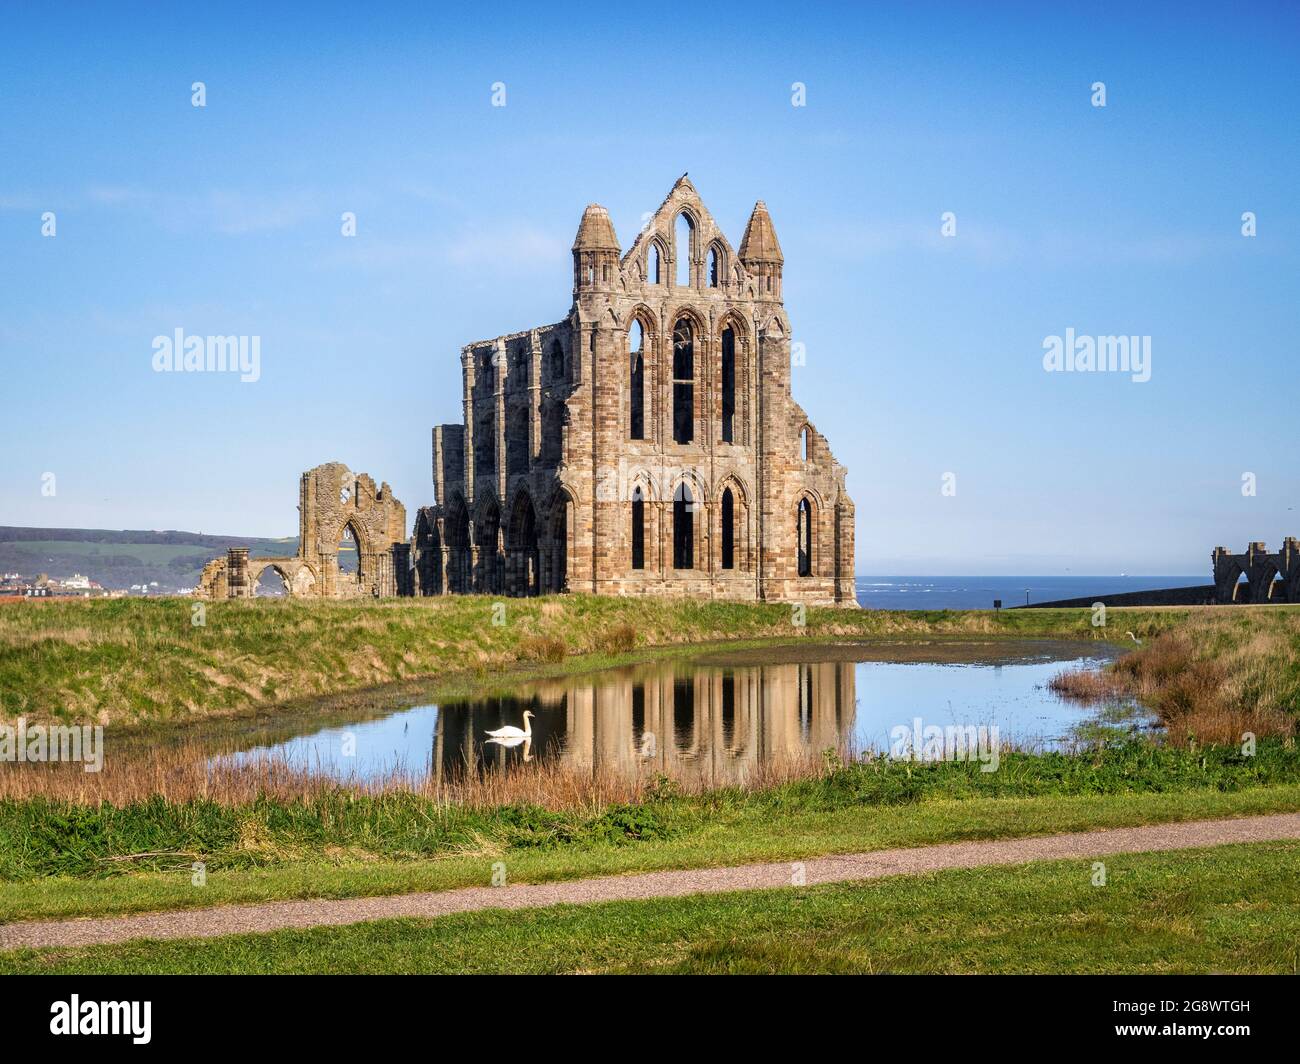 Historic Whitby Abbey reflected in a pool, with a swan. Taken from outside the abbey grounds. Real swan, not added later. Stock Photo